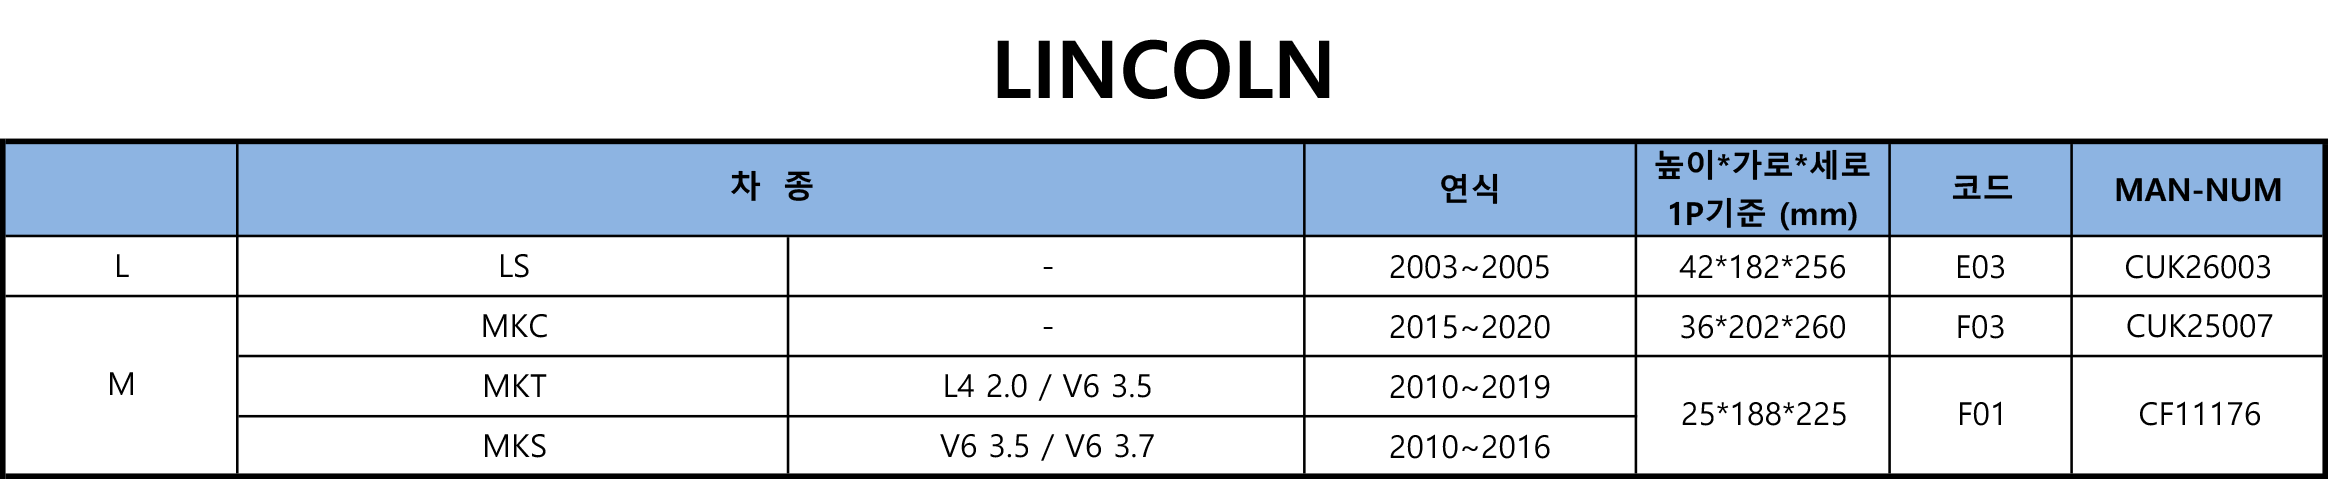 11-LINCOLN.png